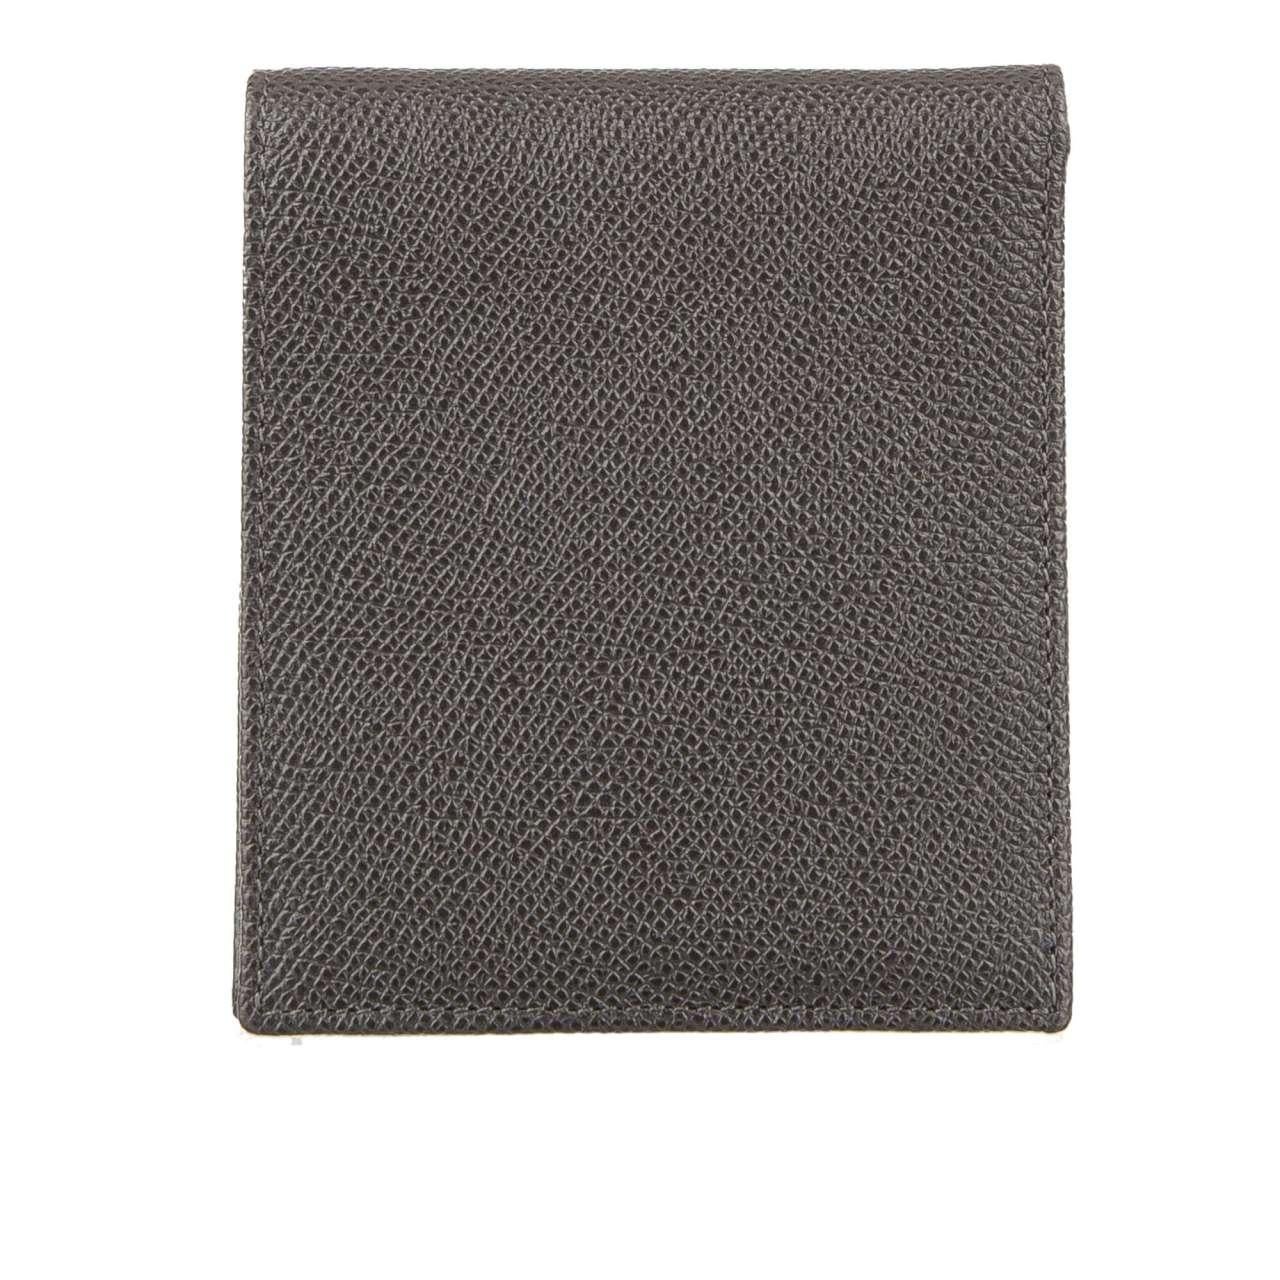 - Dauphine leather bifold wallet with studs and DG metal logo plate in gray by DOLCE & GABBANA - New with Tag and Authenticity Card, without Box - MADE IN ITALY - Model: BP1321-AC122-80747 - Material: 100% Calfskin - Studs and DG logo metal plate in